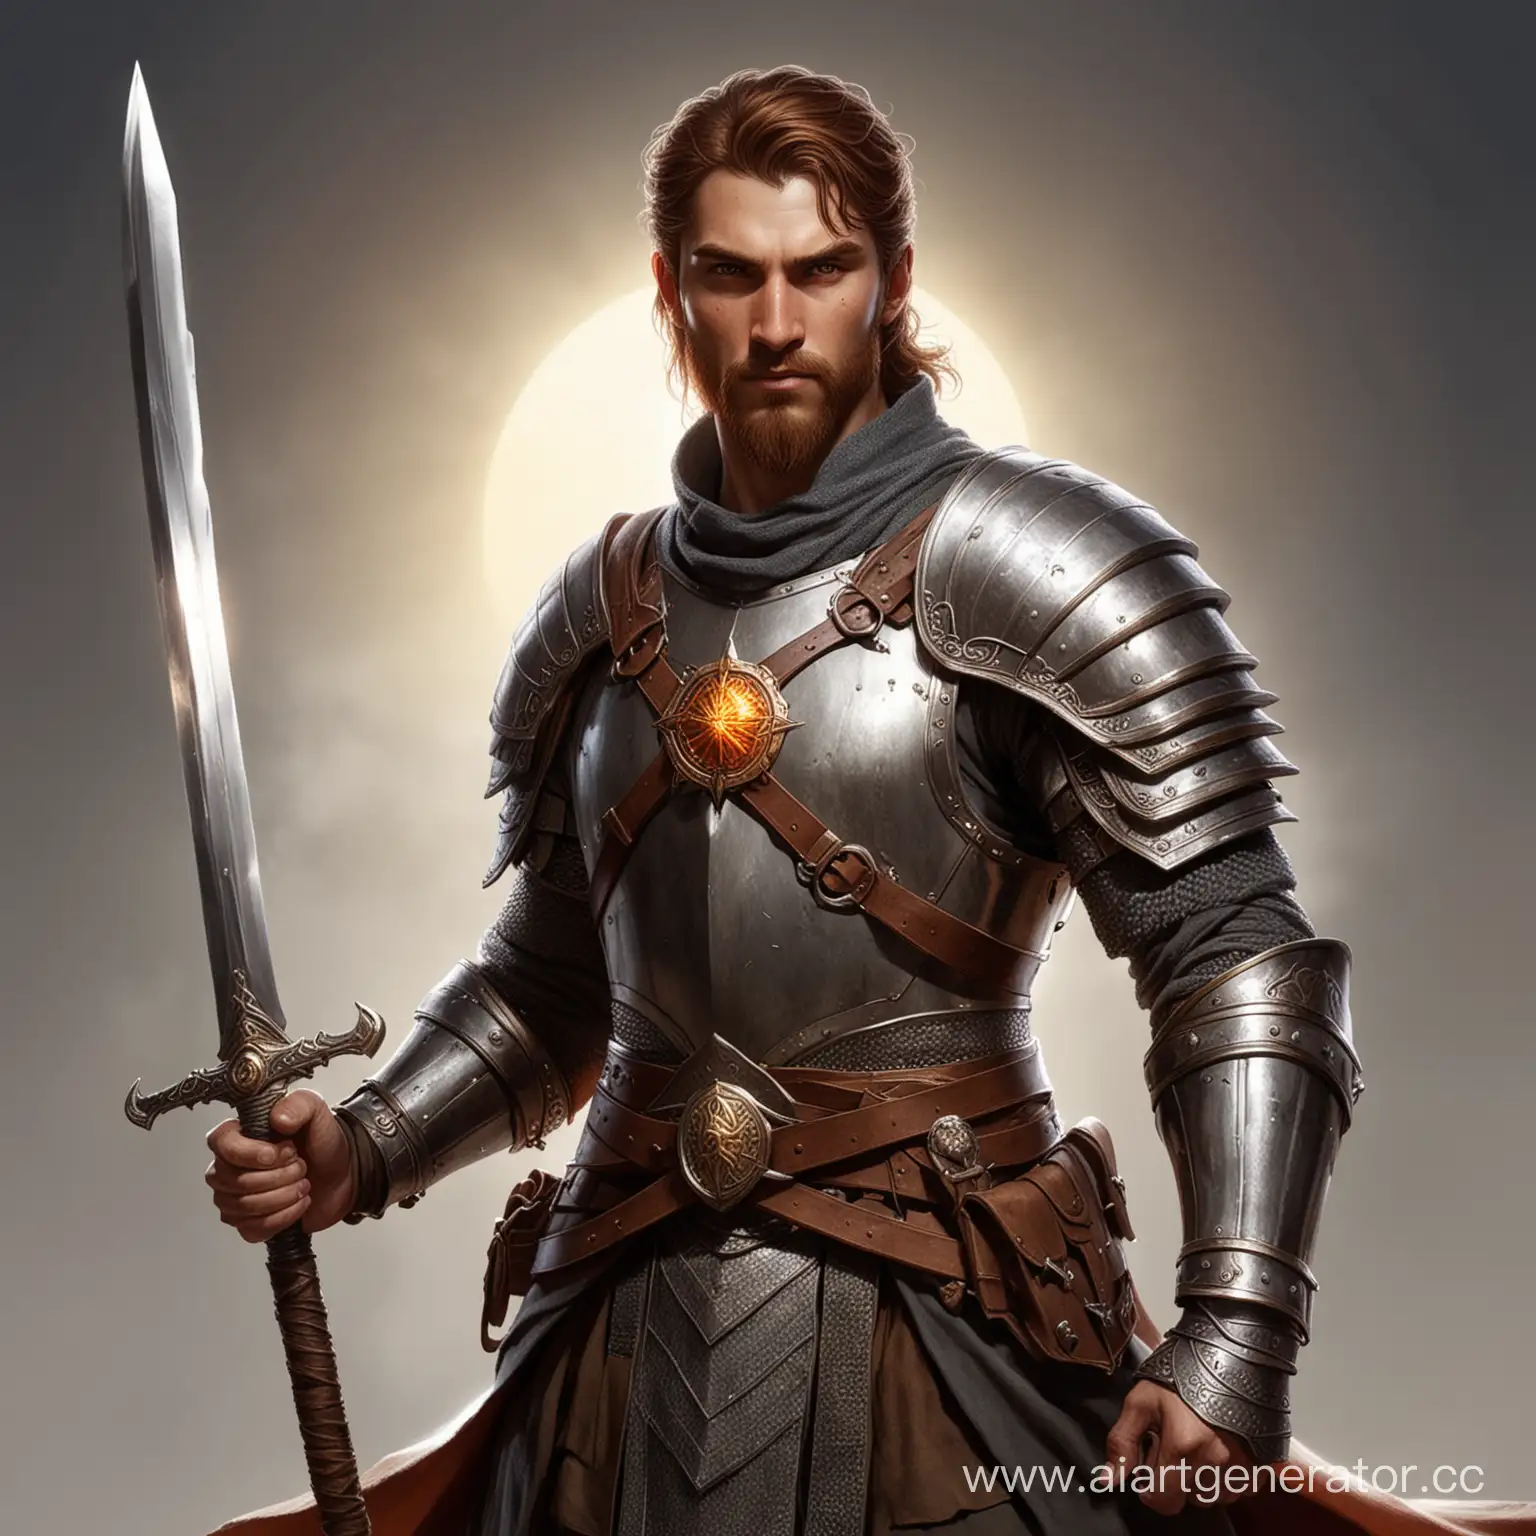 Human-Paladin-Wielding-TwoHanded-Sword-with-Religious-Symbolism